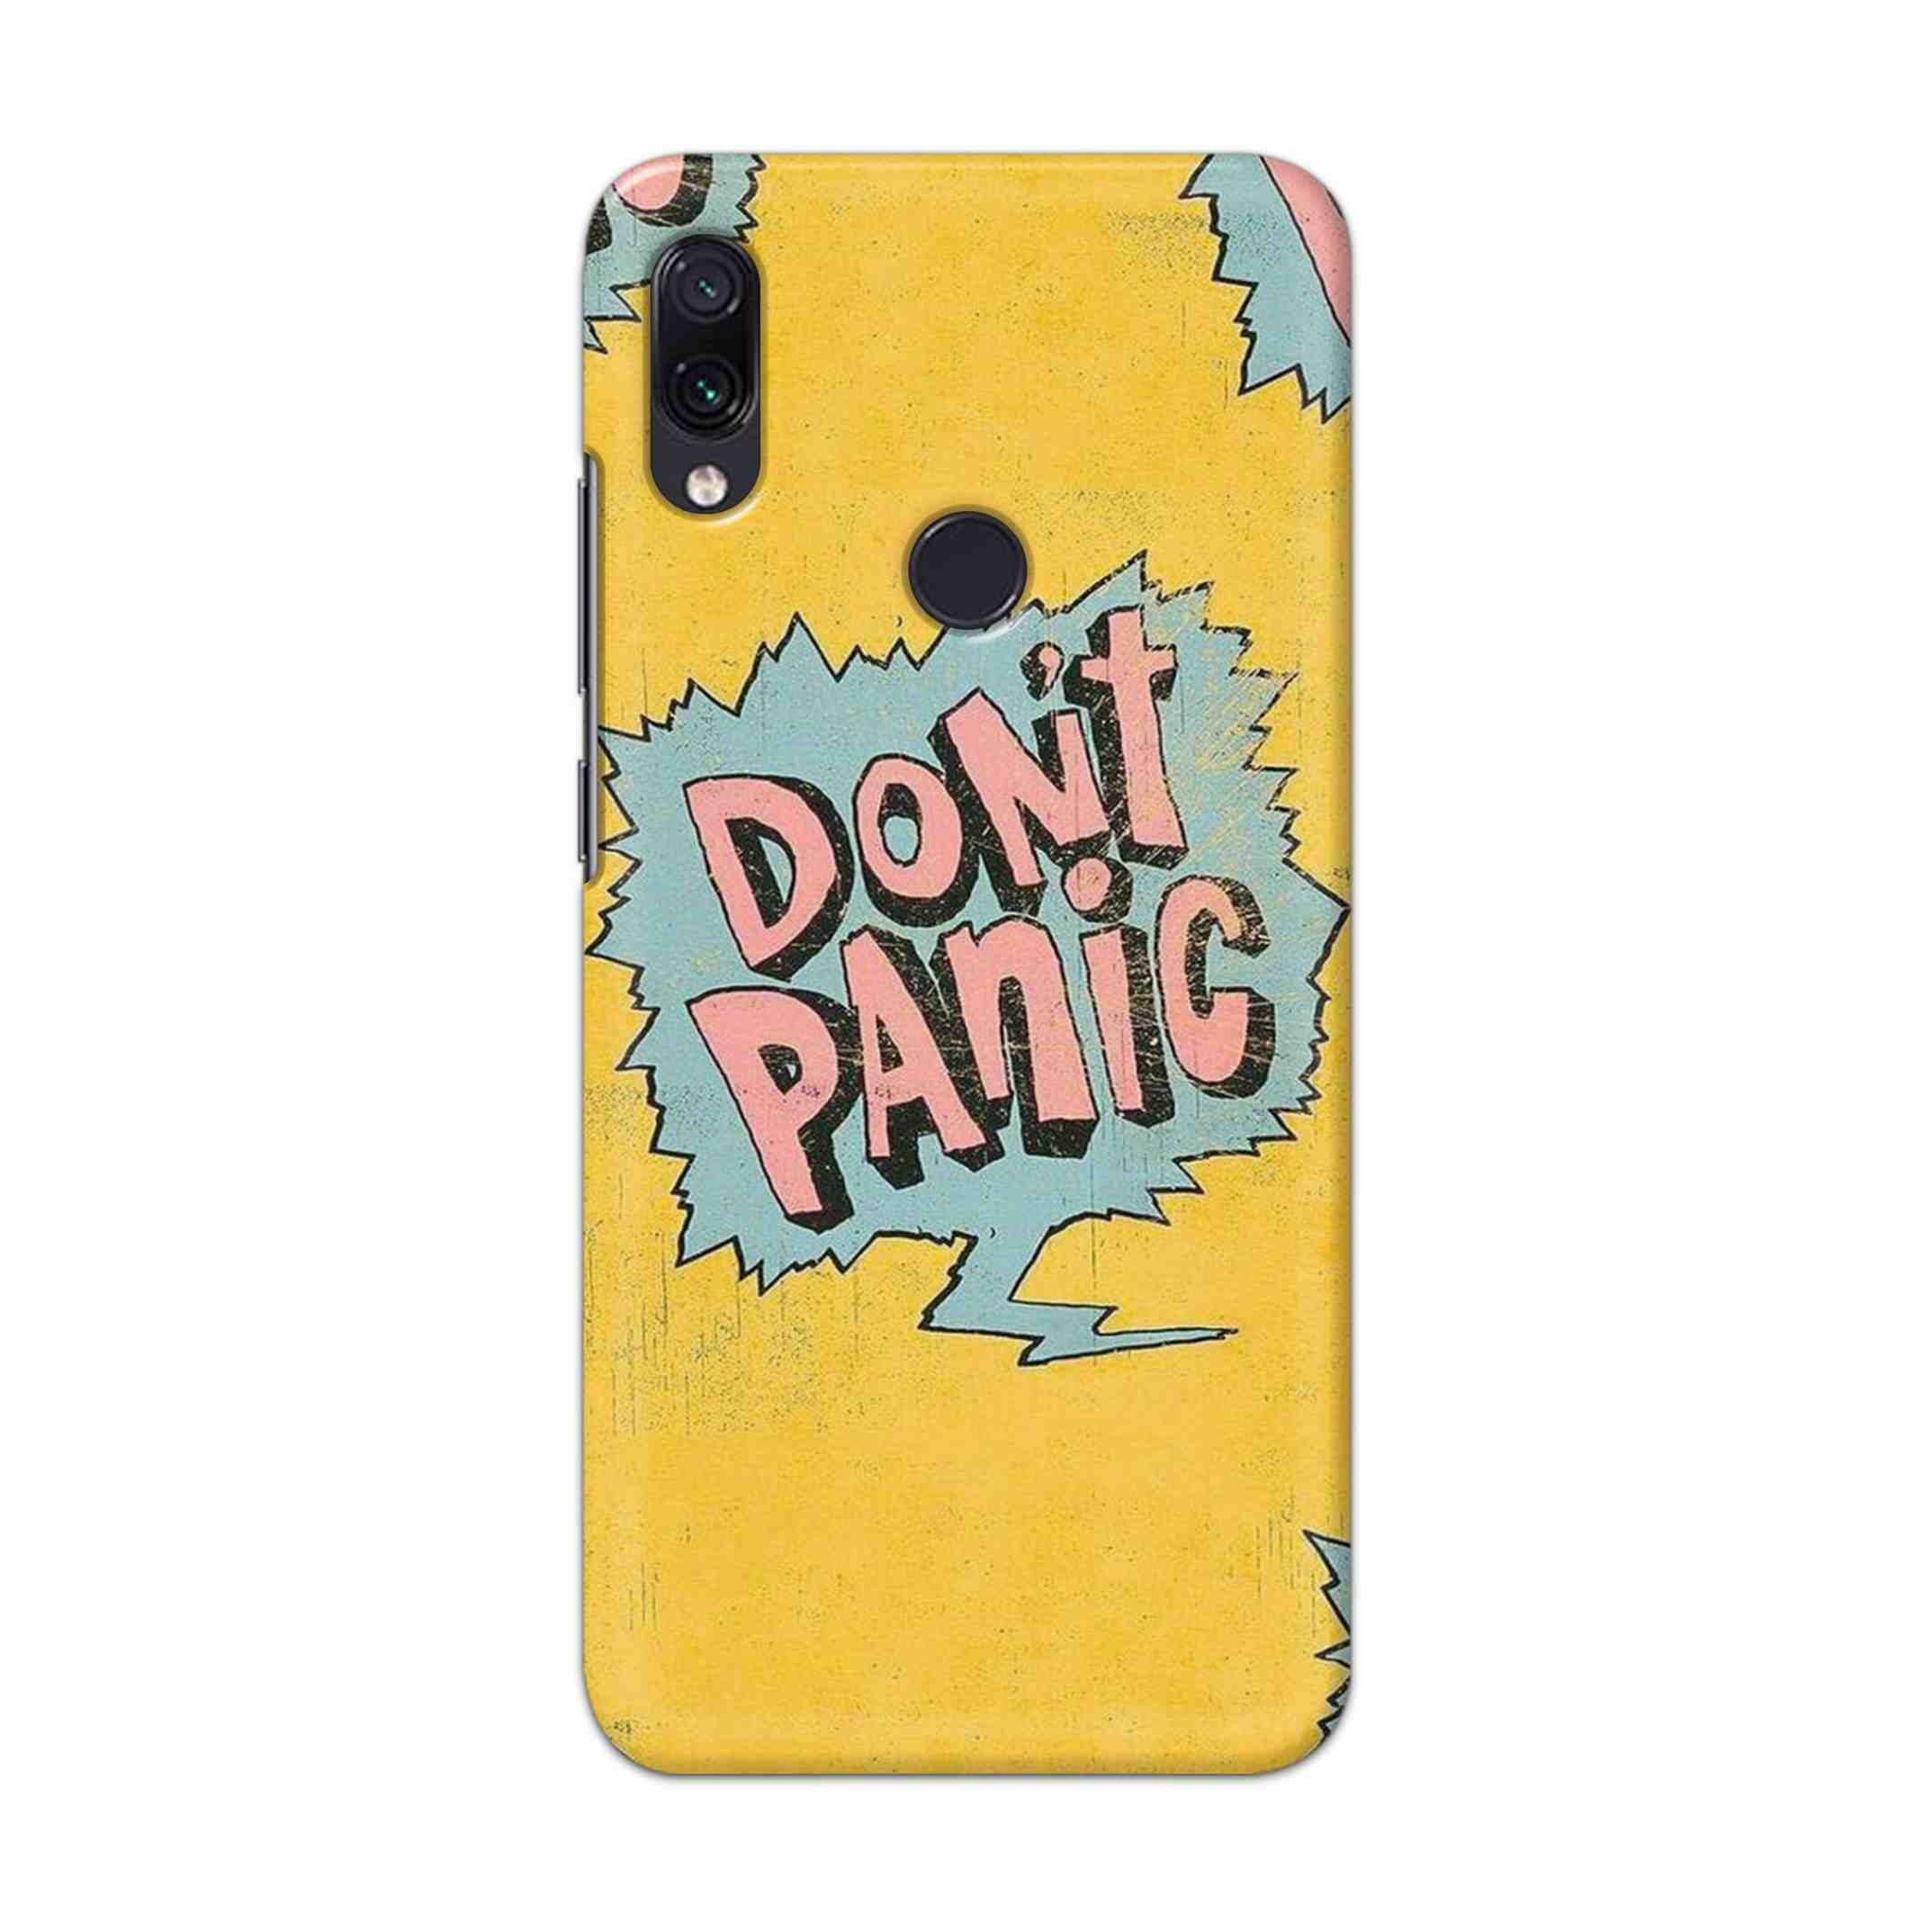 Buy Do Not Panic Hard Back Mobile Phone Case Cover For Xiaomi Redmi 7 Online